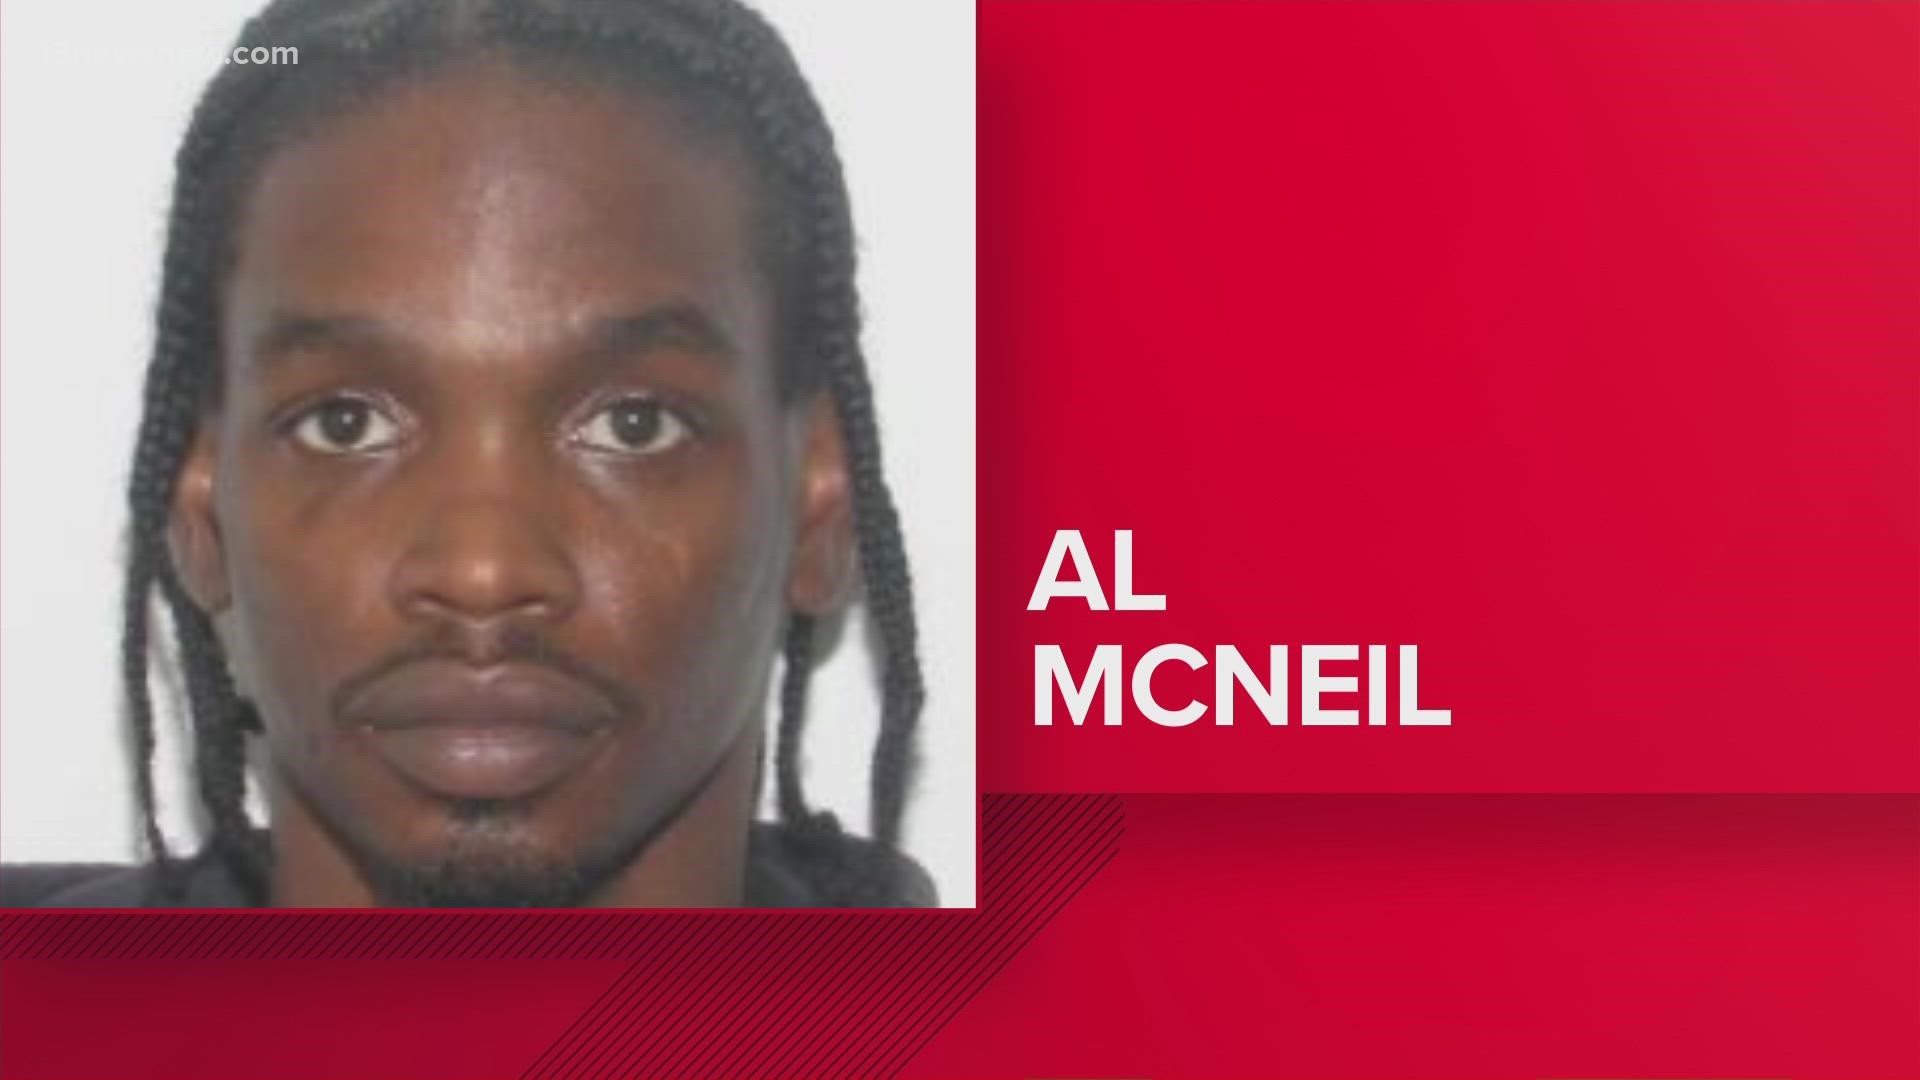 PPD said 39-year-old Al McNeil turned himself in Monday.